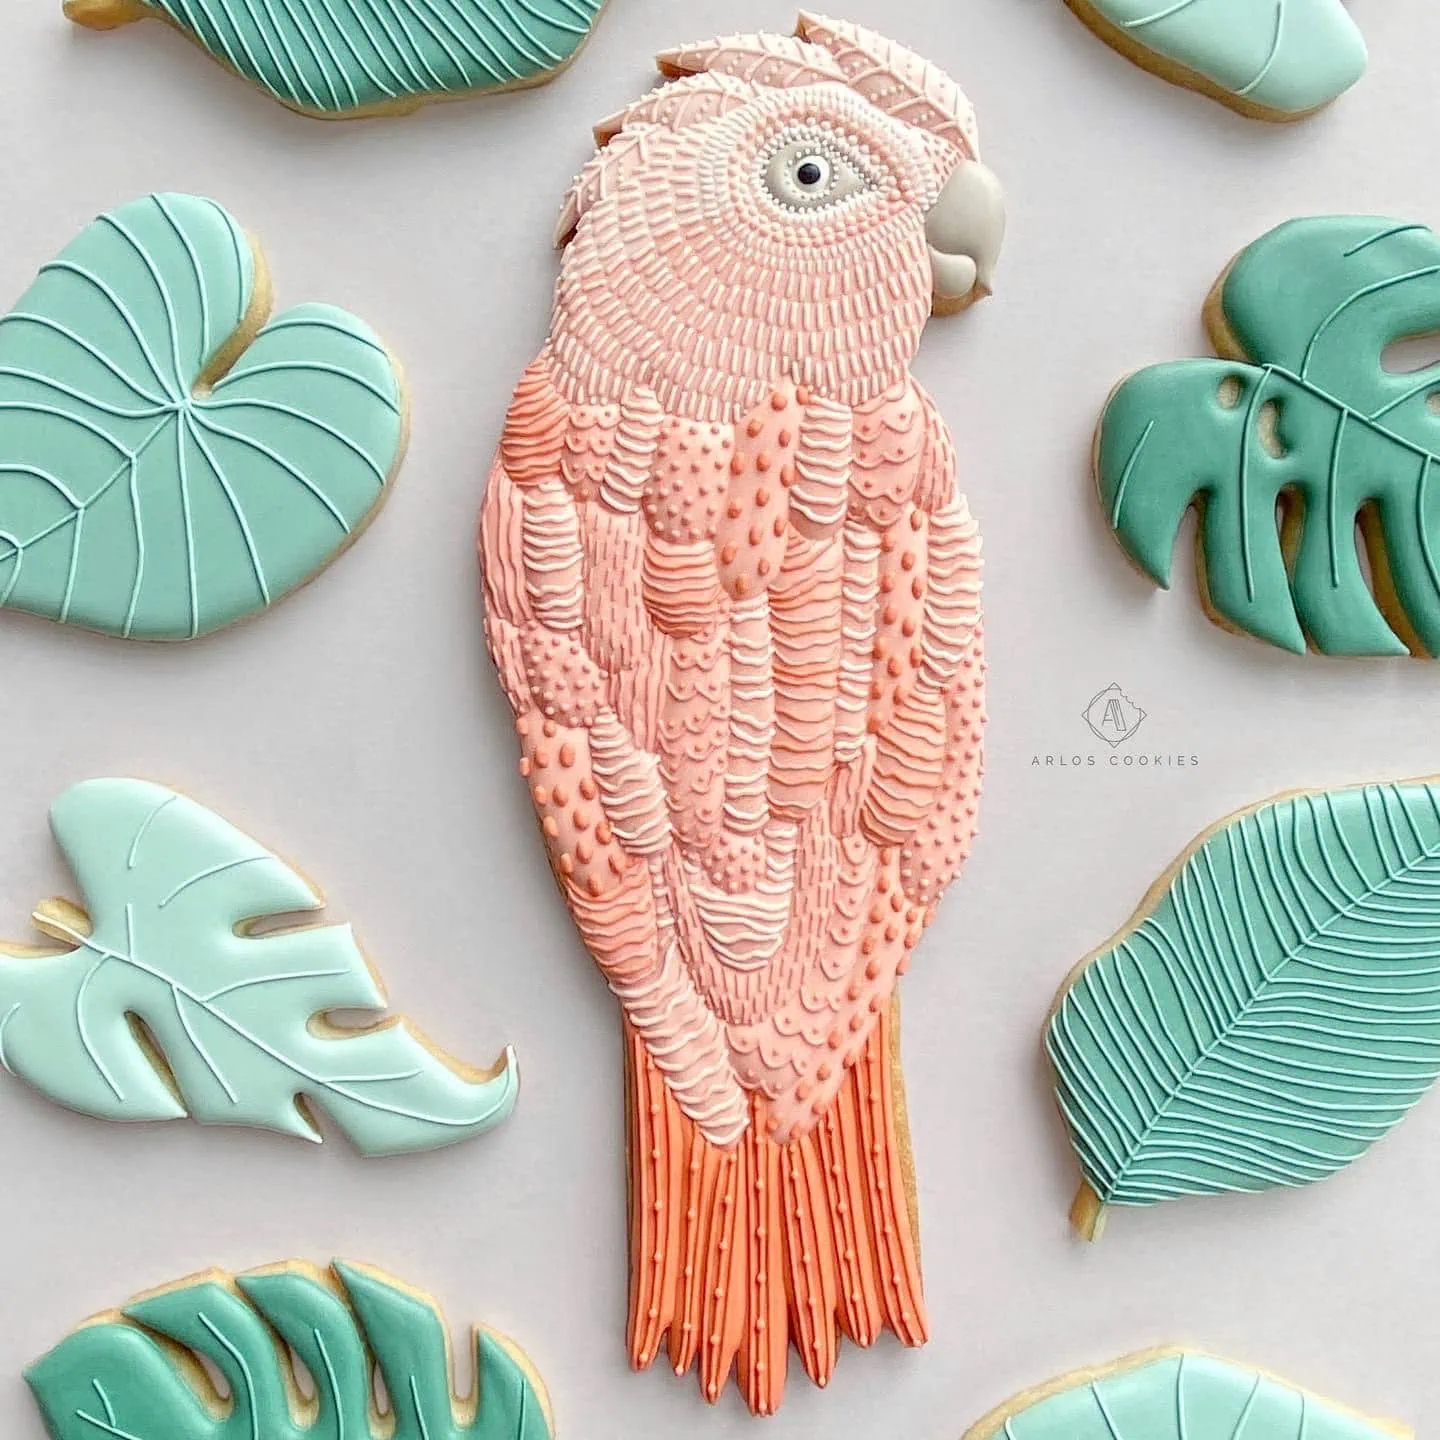 Decorated pink parrot cookie surrounded by green leaf cookies.